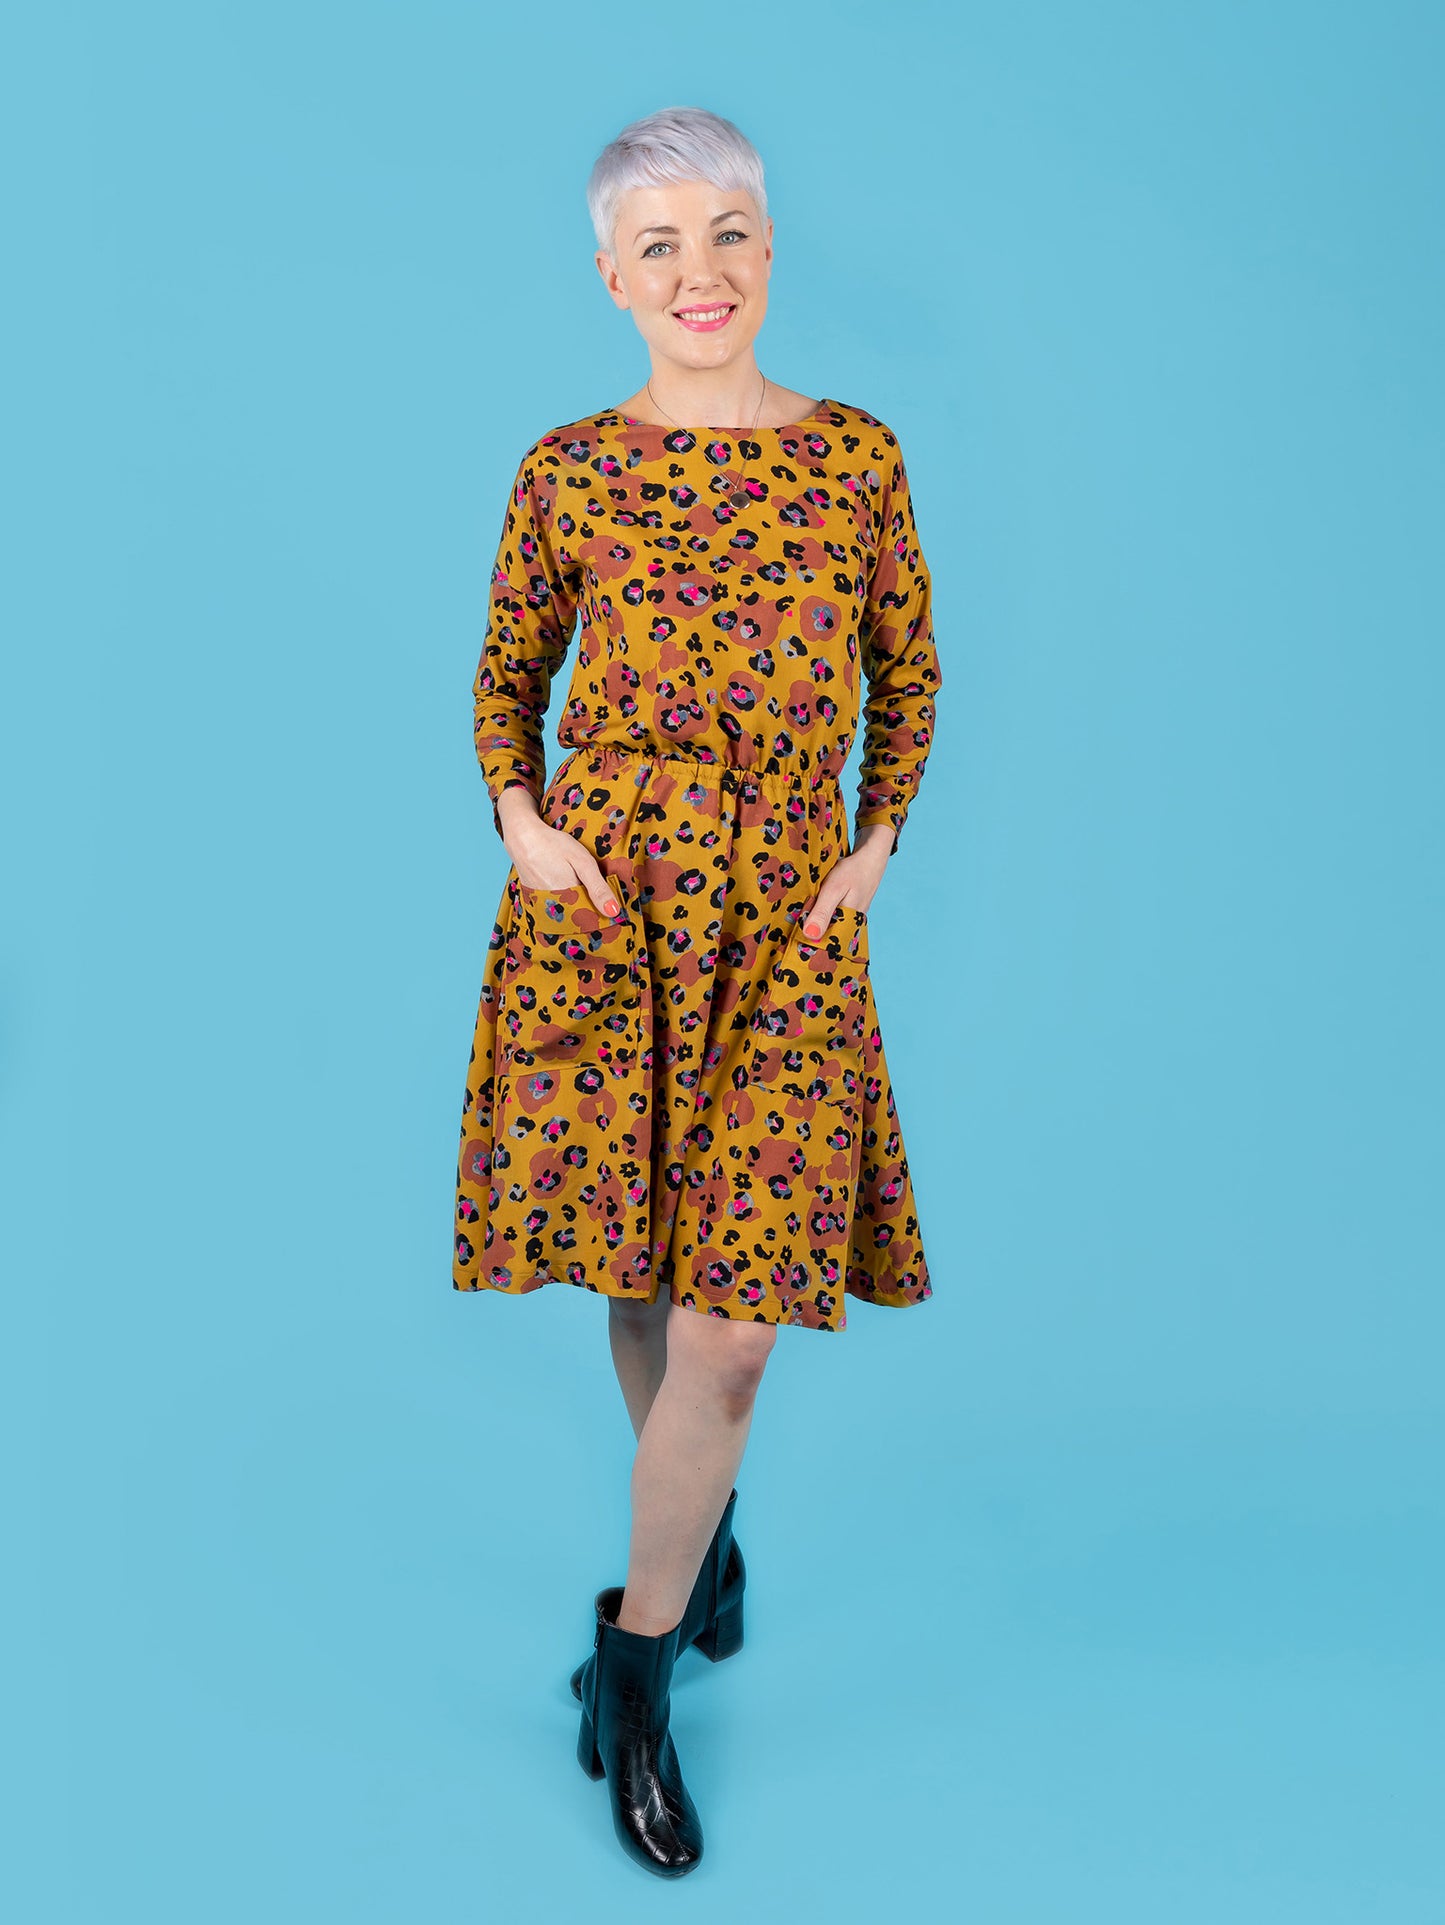 Lotta Dress | Tilly And The Buttons